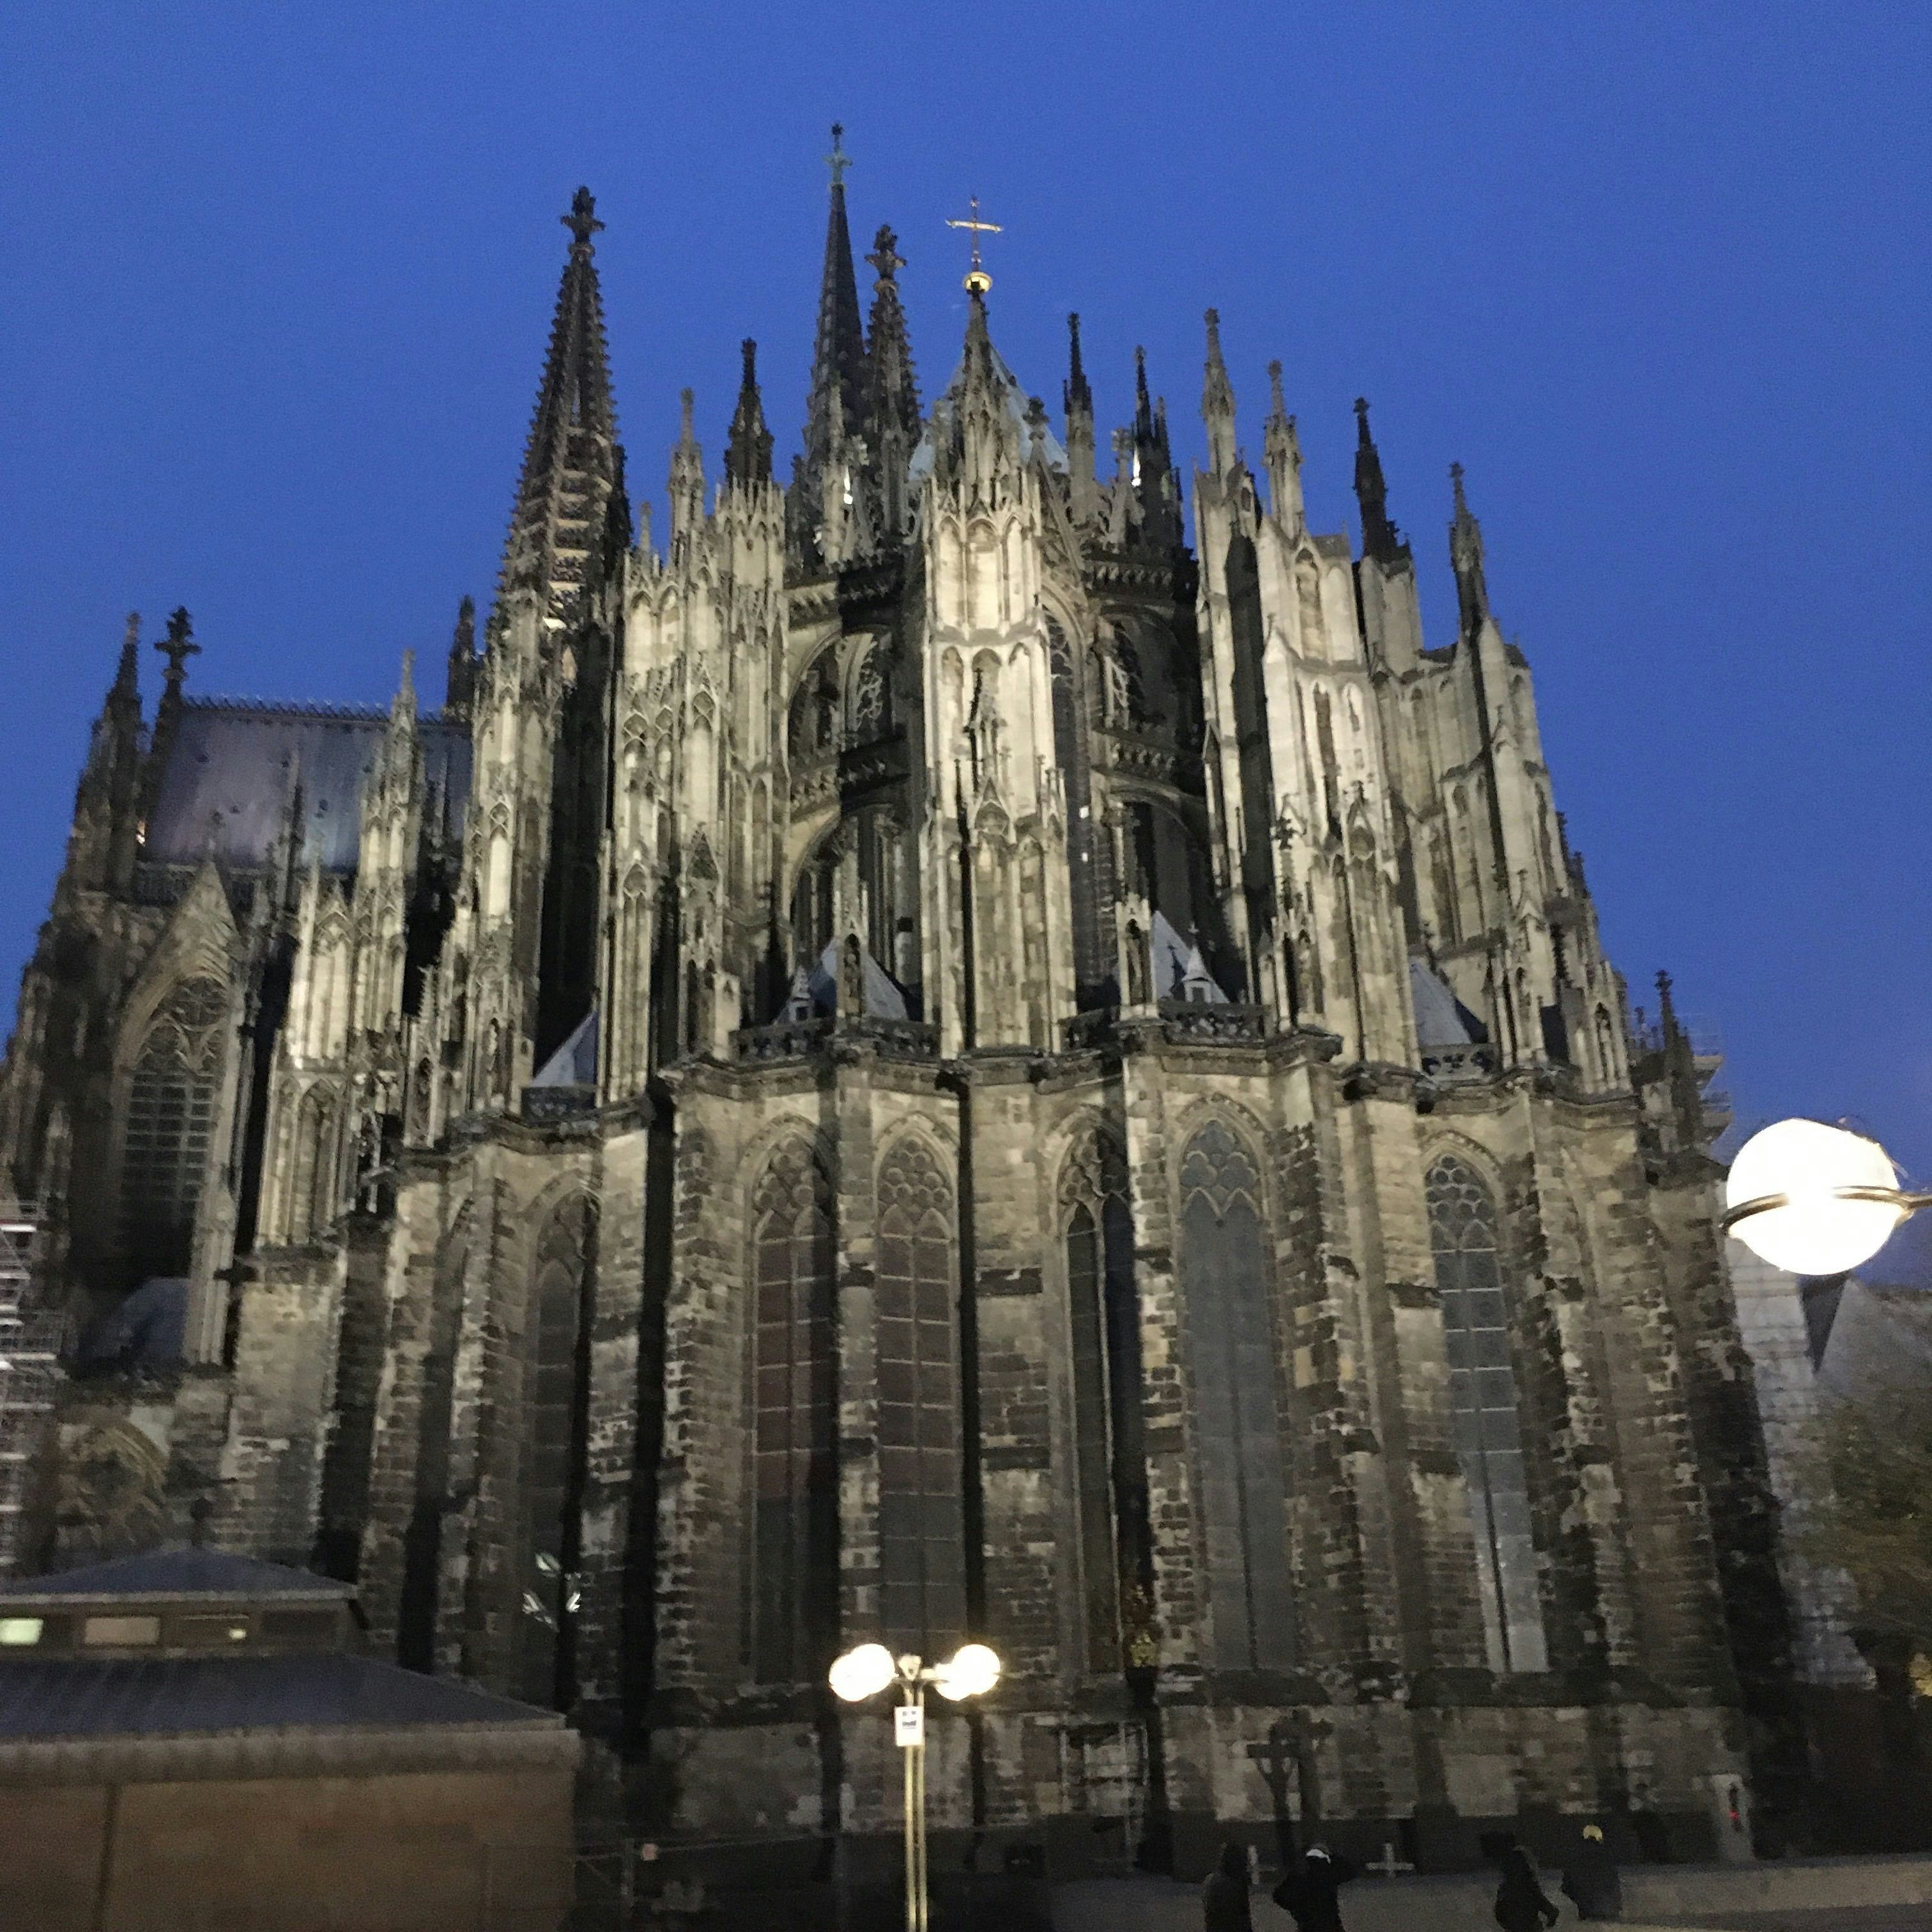 The Cologne cathedral lit up at night.